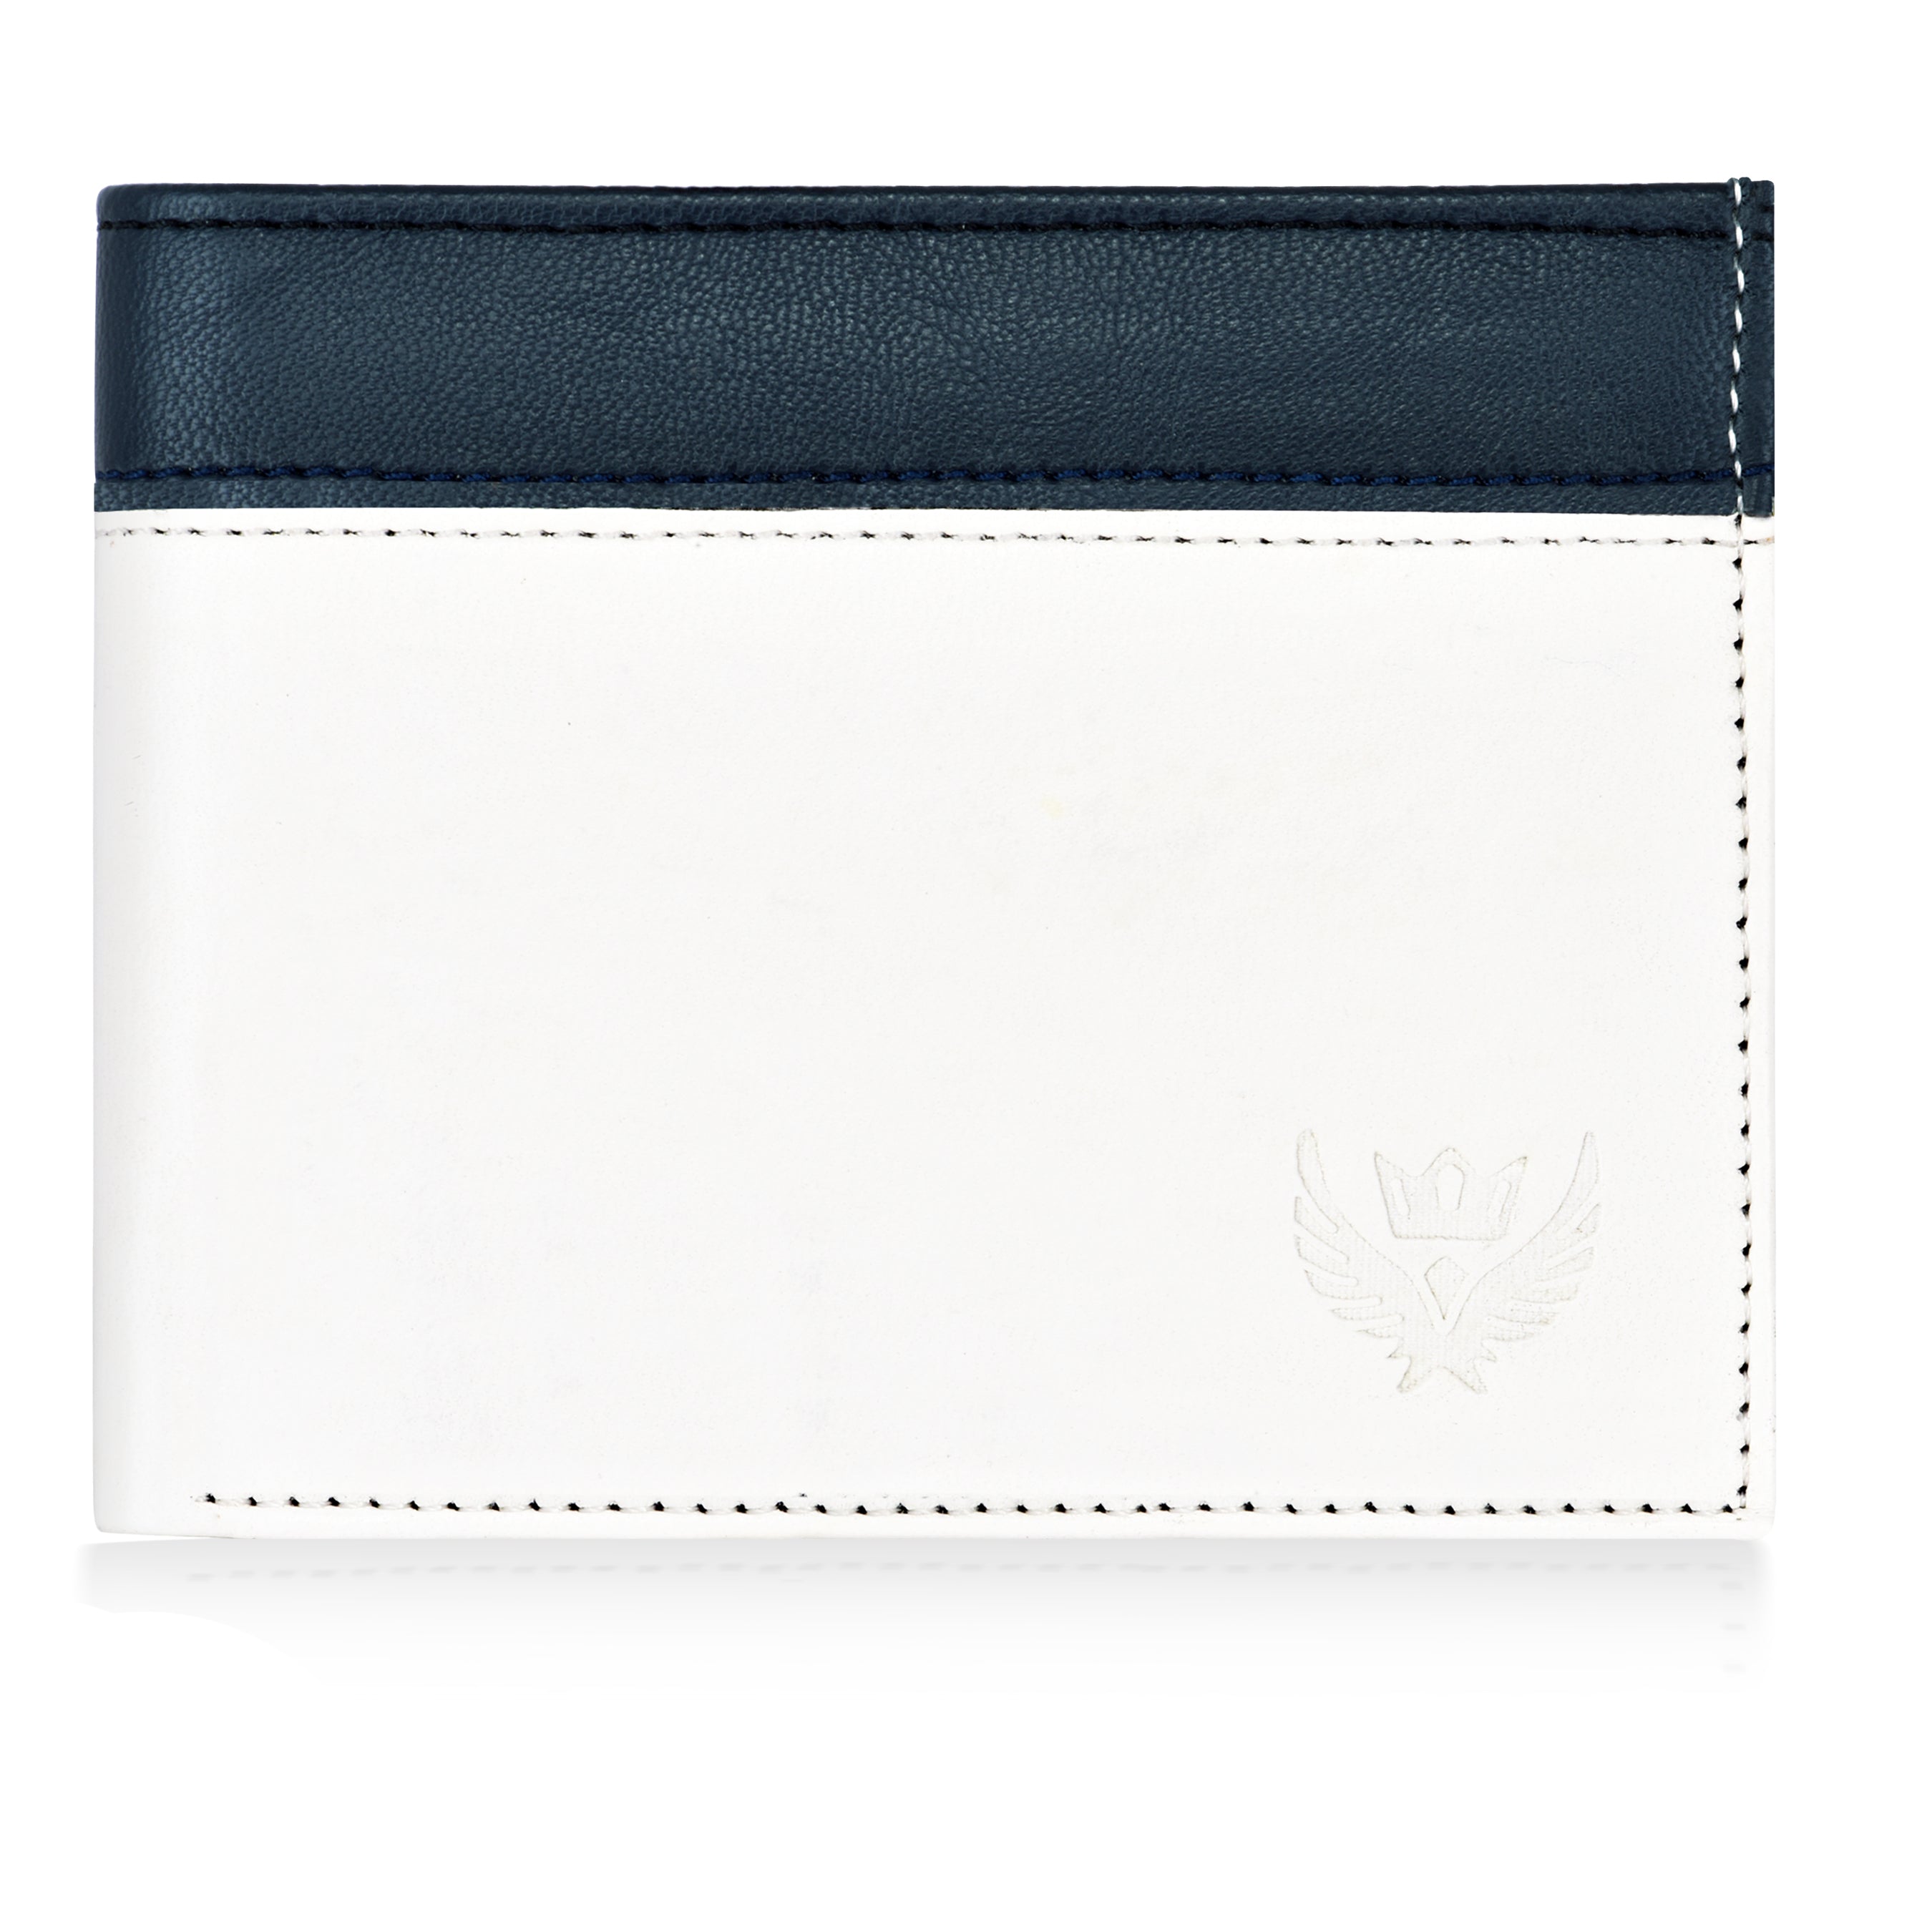 Lorenz White Leather Wallet with multiple compartments for cards and cash.